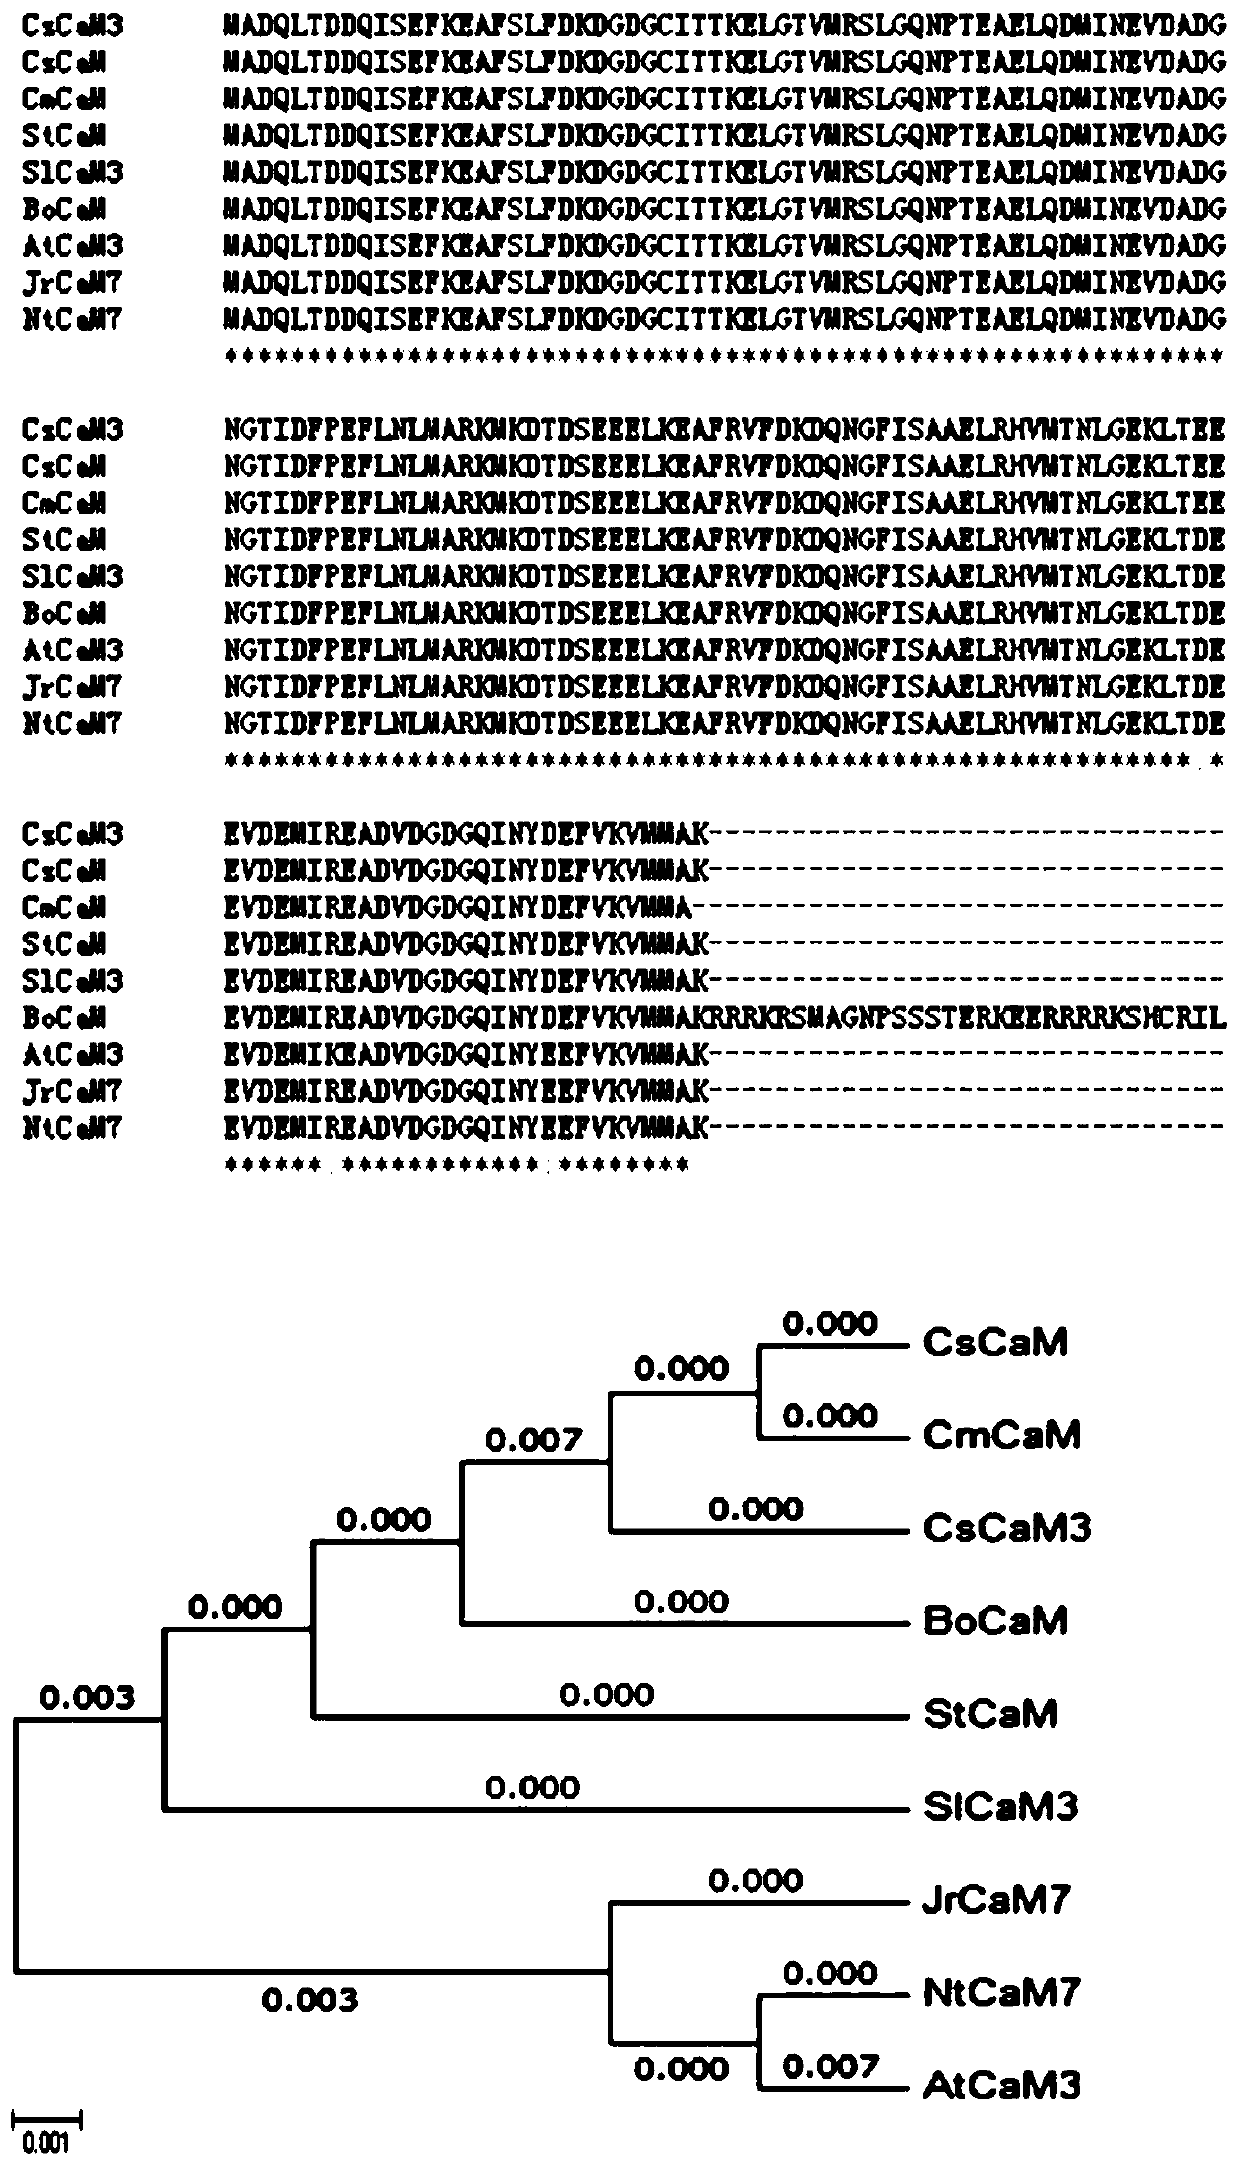 Application of a Cucumber Calcium Binding Protein Gene cscam in Improving Heat Tolerance of Plants